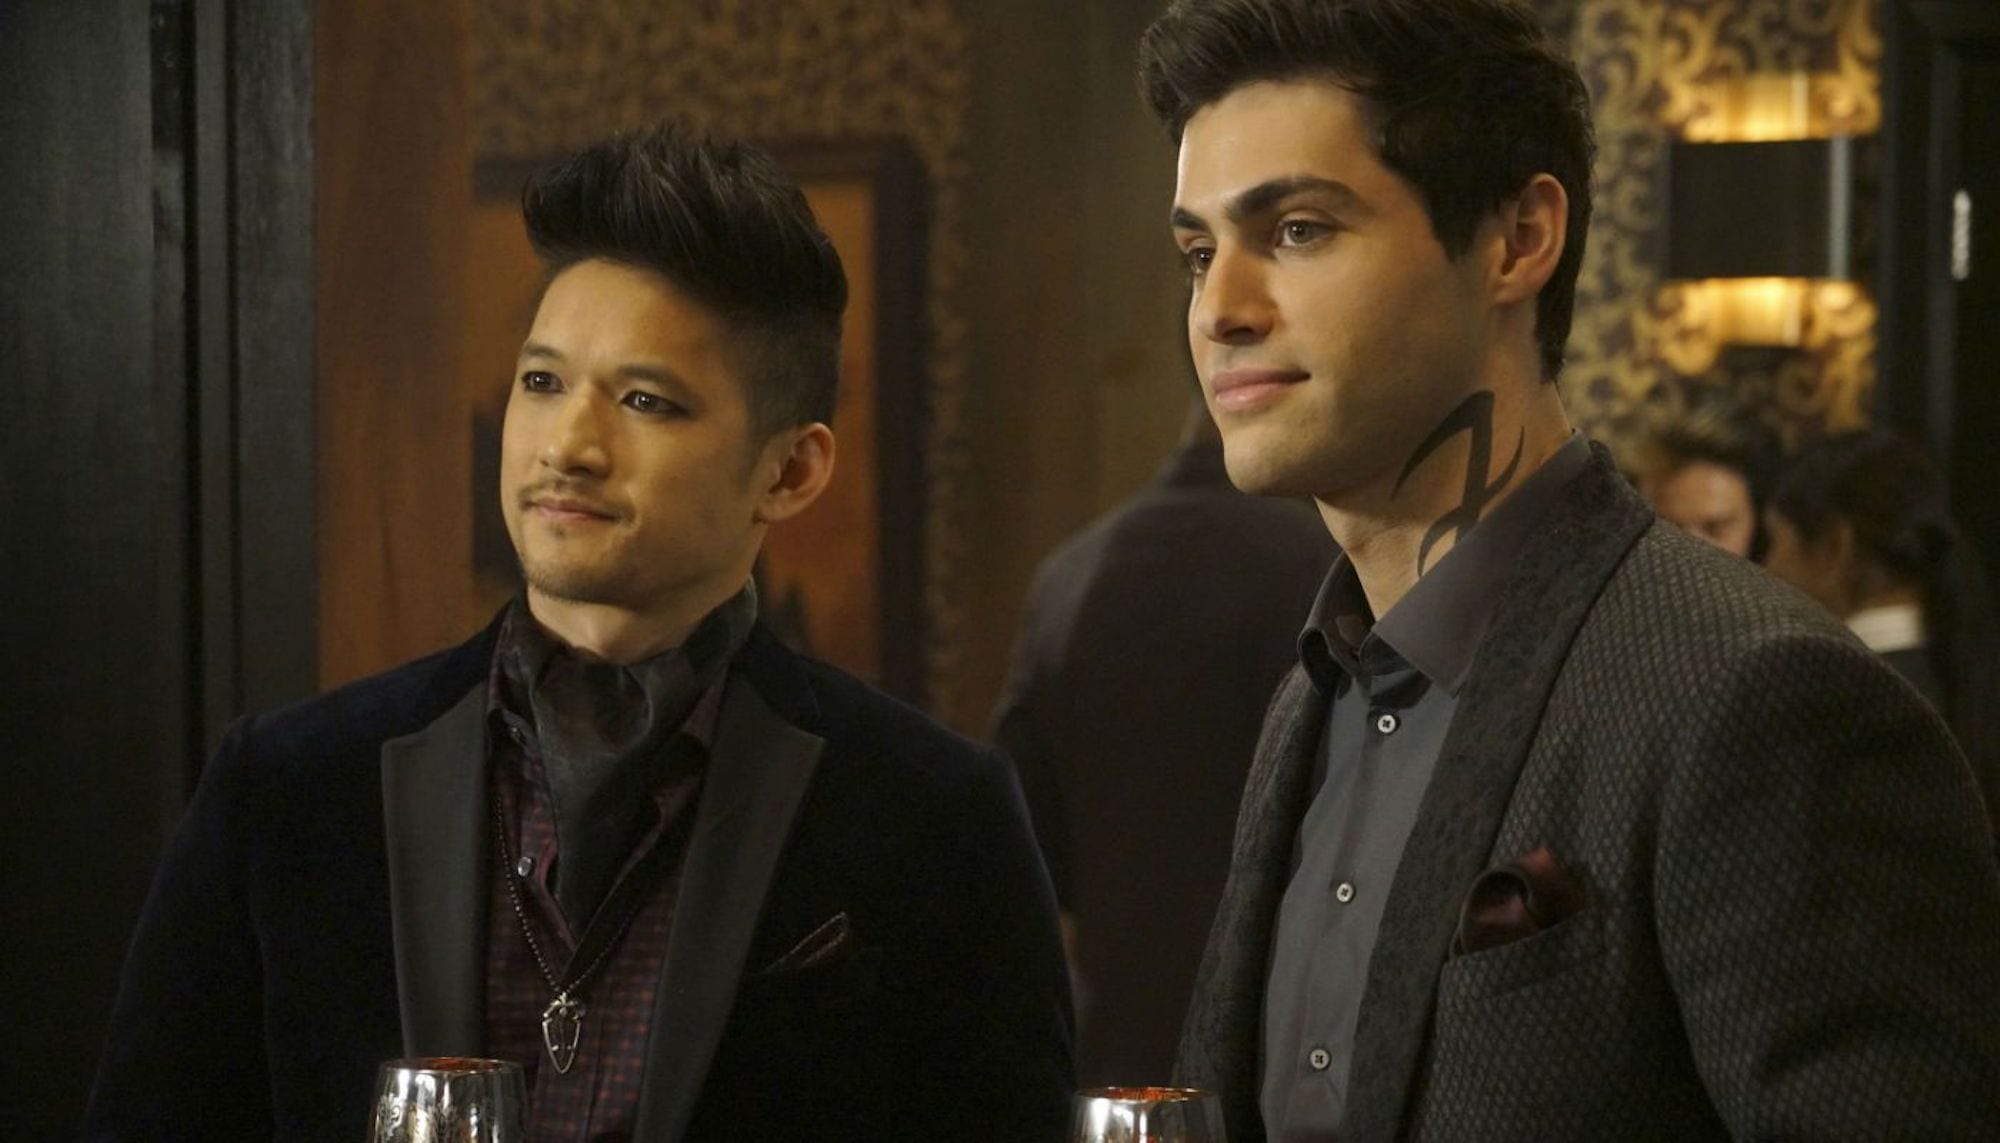 As we said farewell to 'Shadowhunters', one sentiment continued to echo through fans of Matthew Daddario and Harry Shum Jr.: Malec forever.